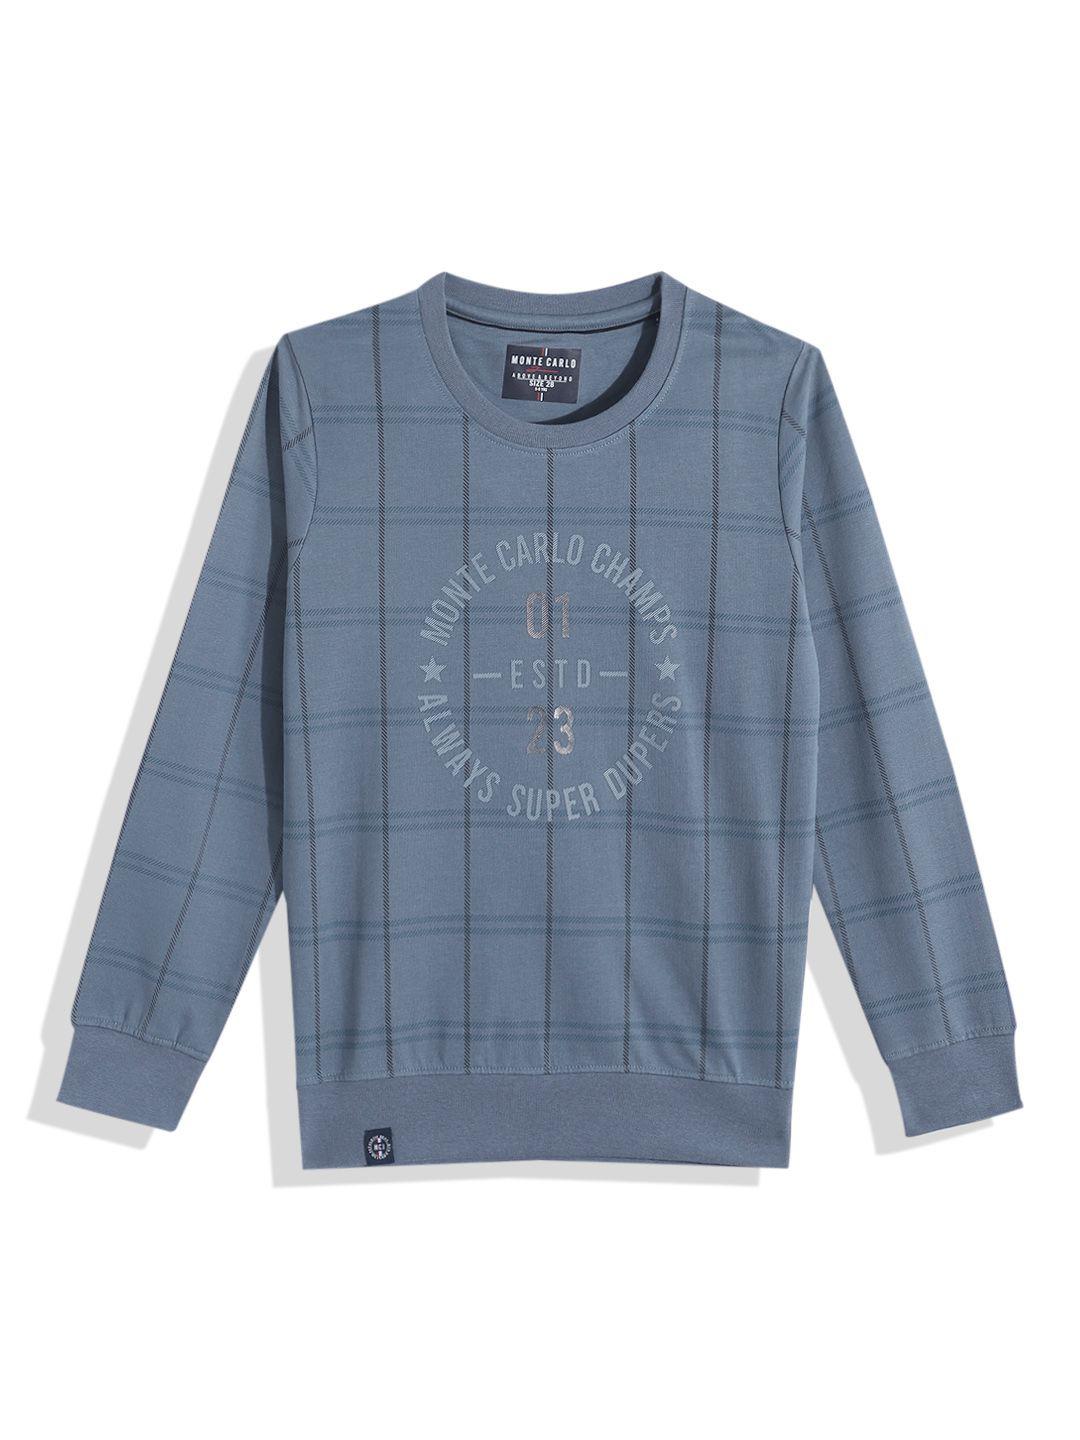 monte carlo boys checked pure cotton sweatshirt with printed detail